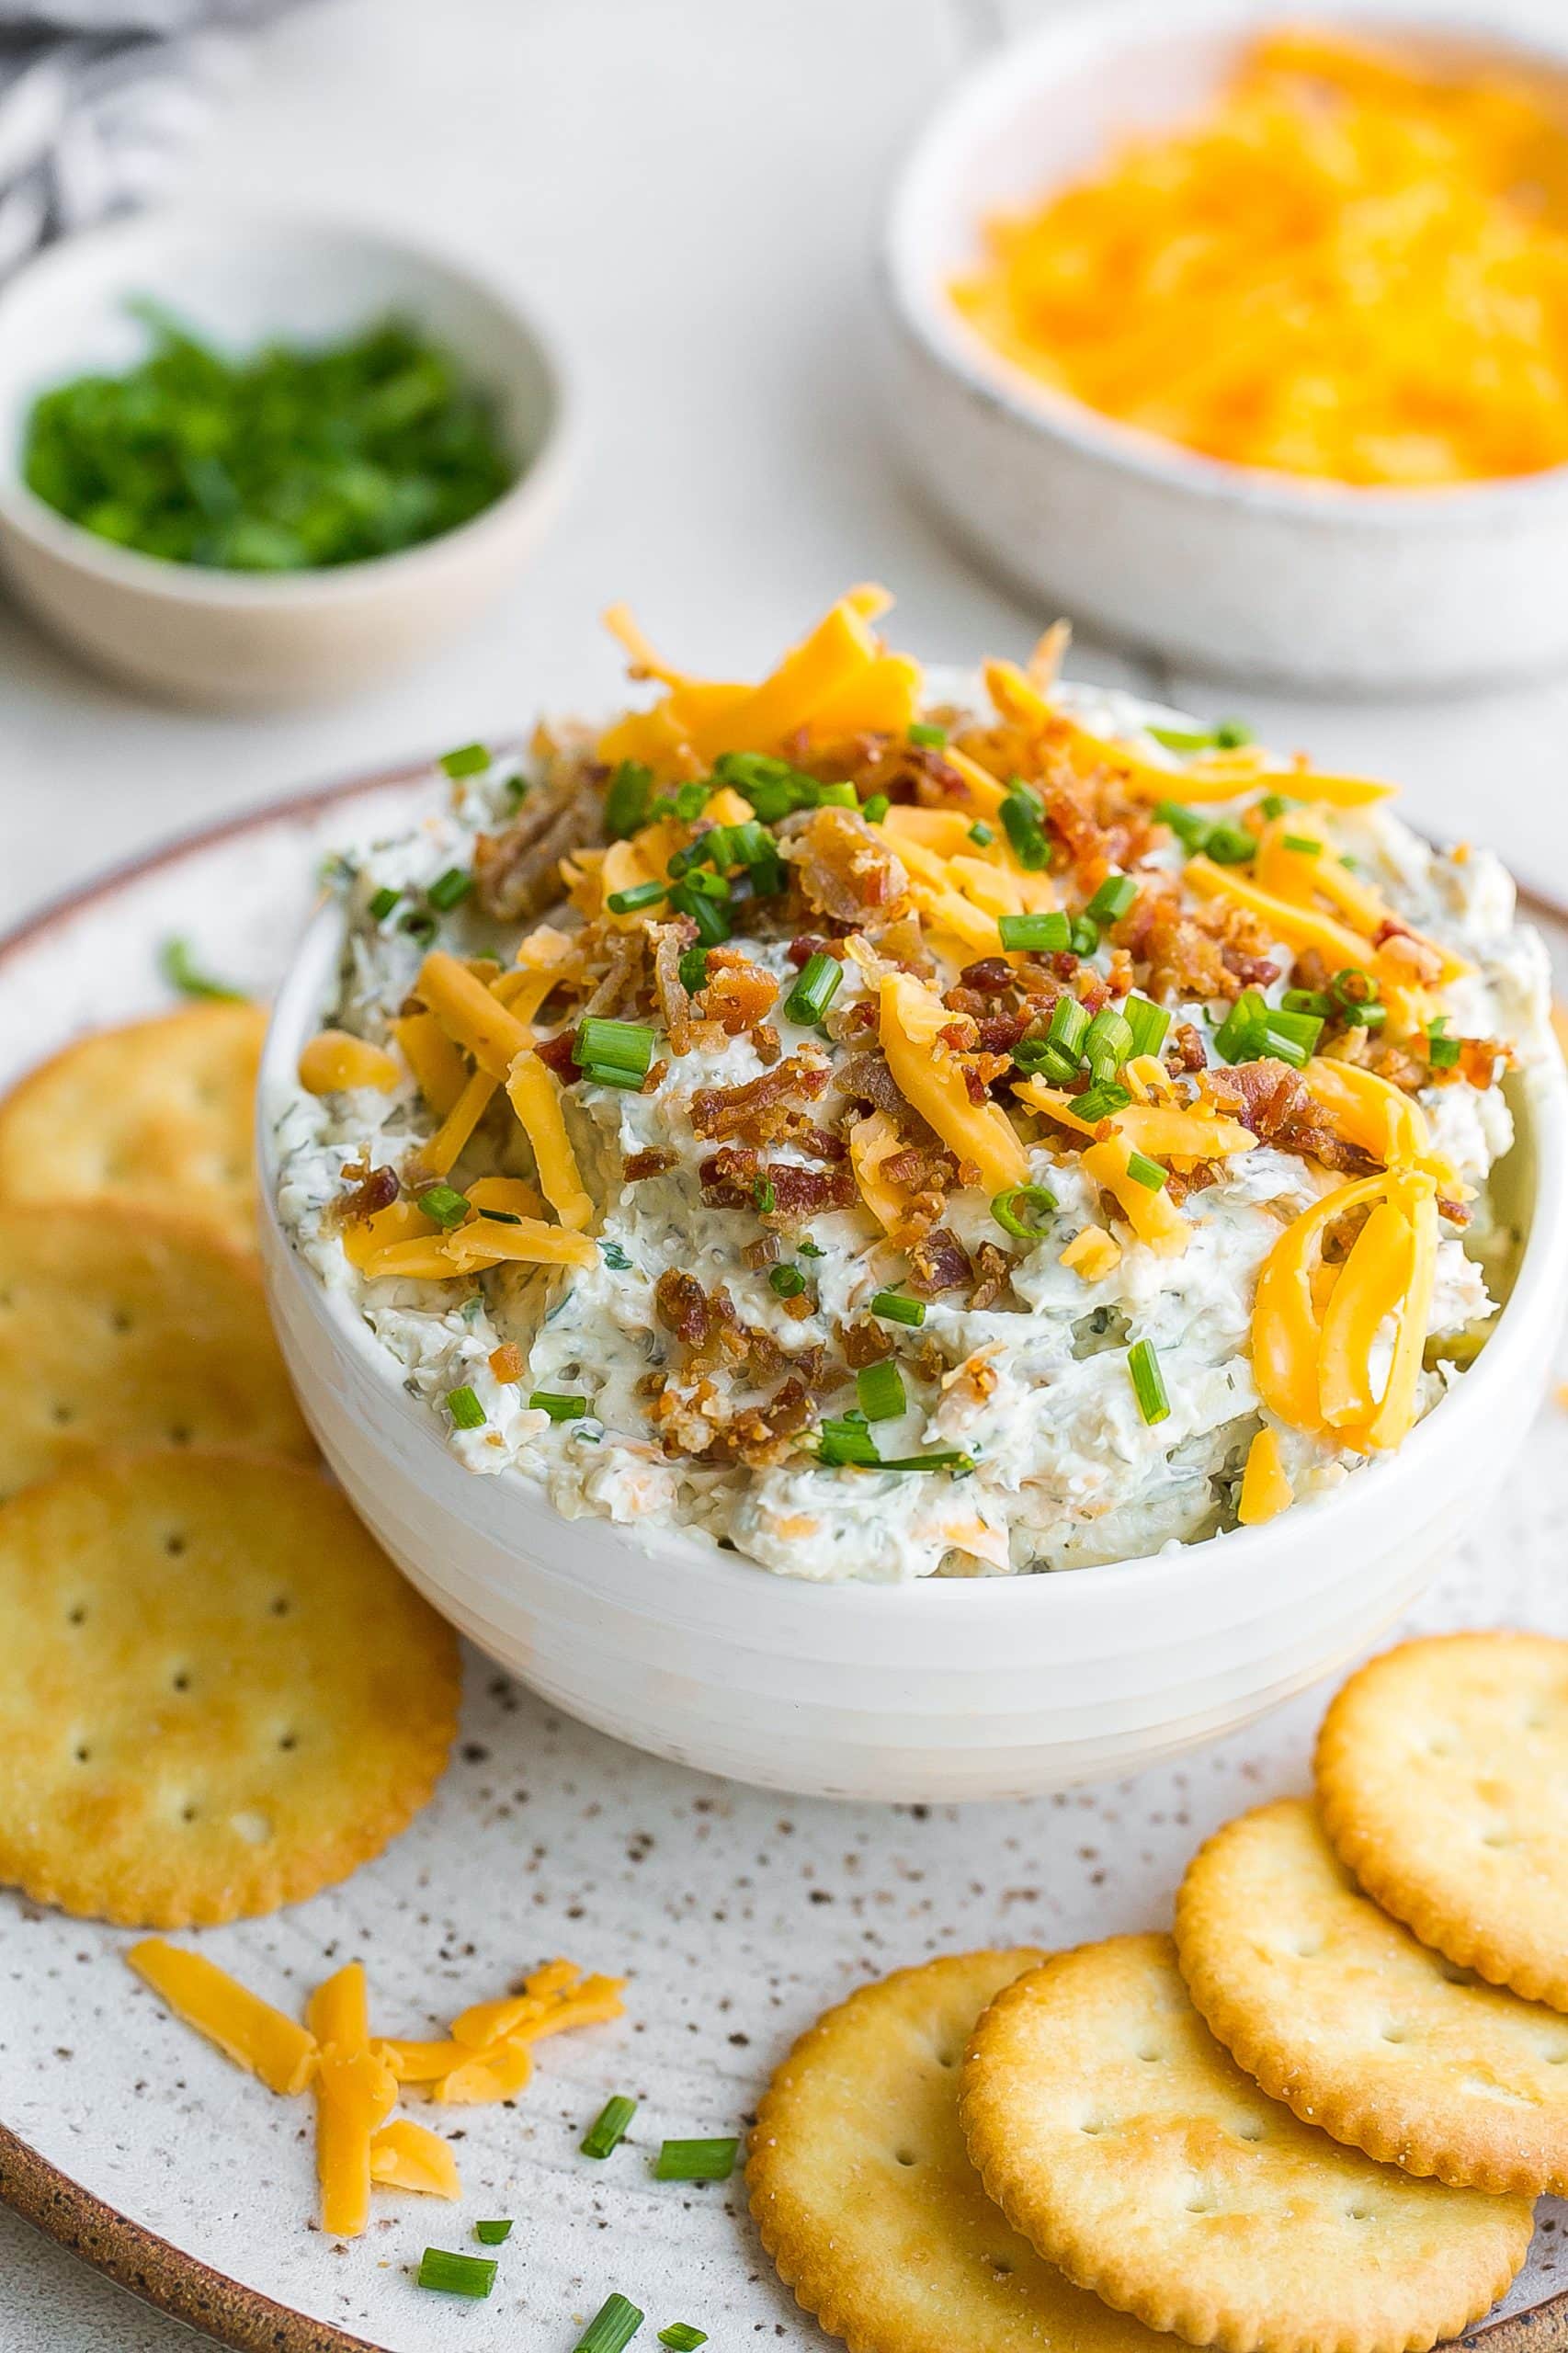 Cheddar cheese dip in a bowl.